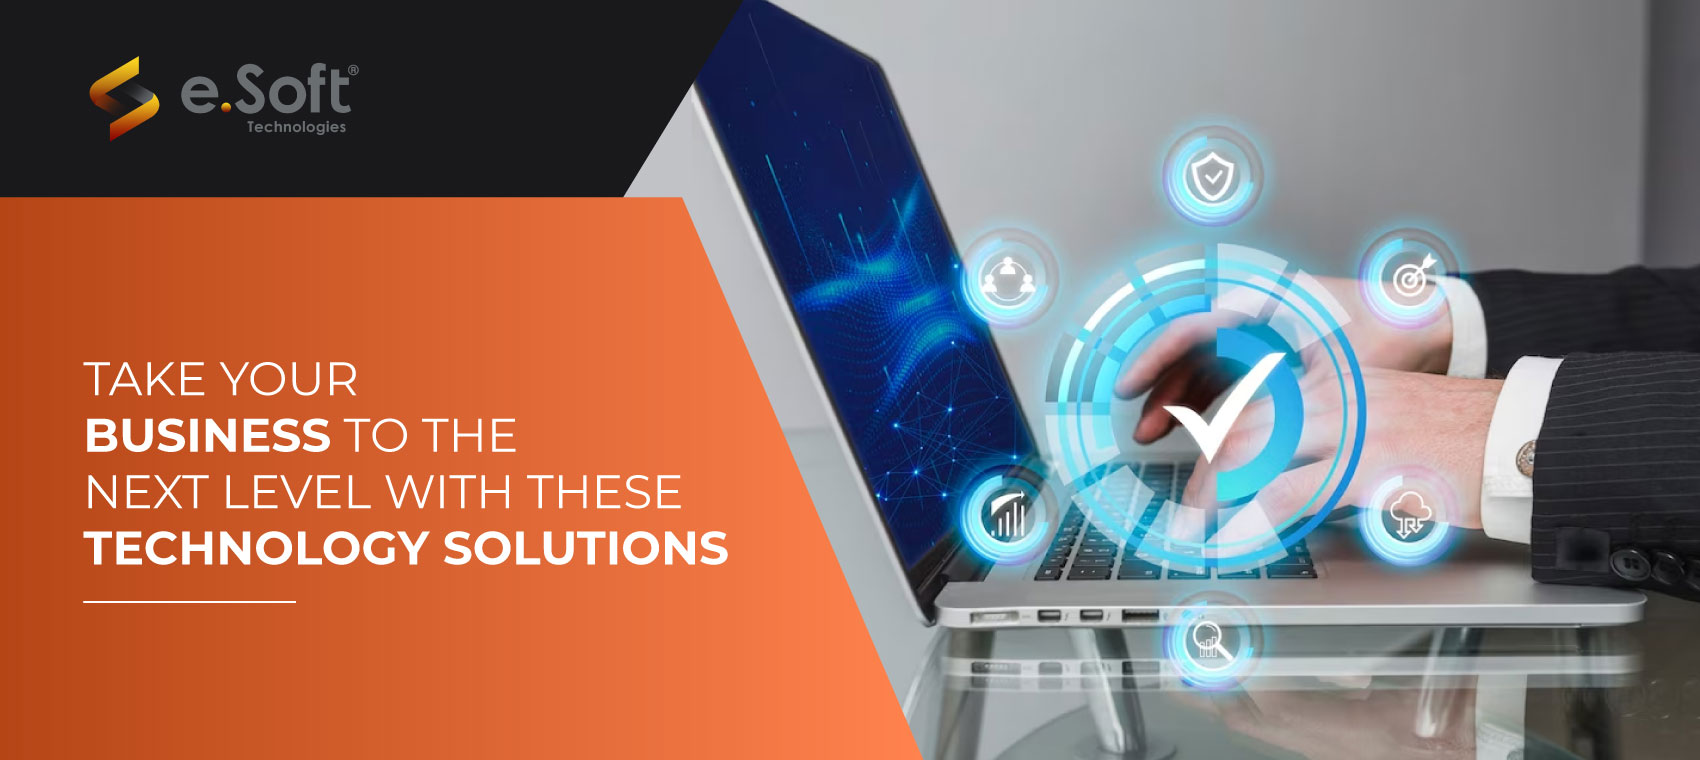 Take your business to the next level with technology solutions provided by e.Soft Technologies